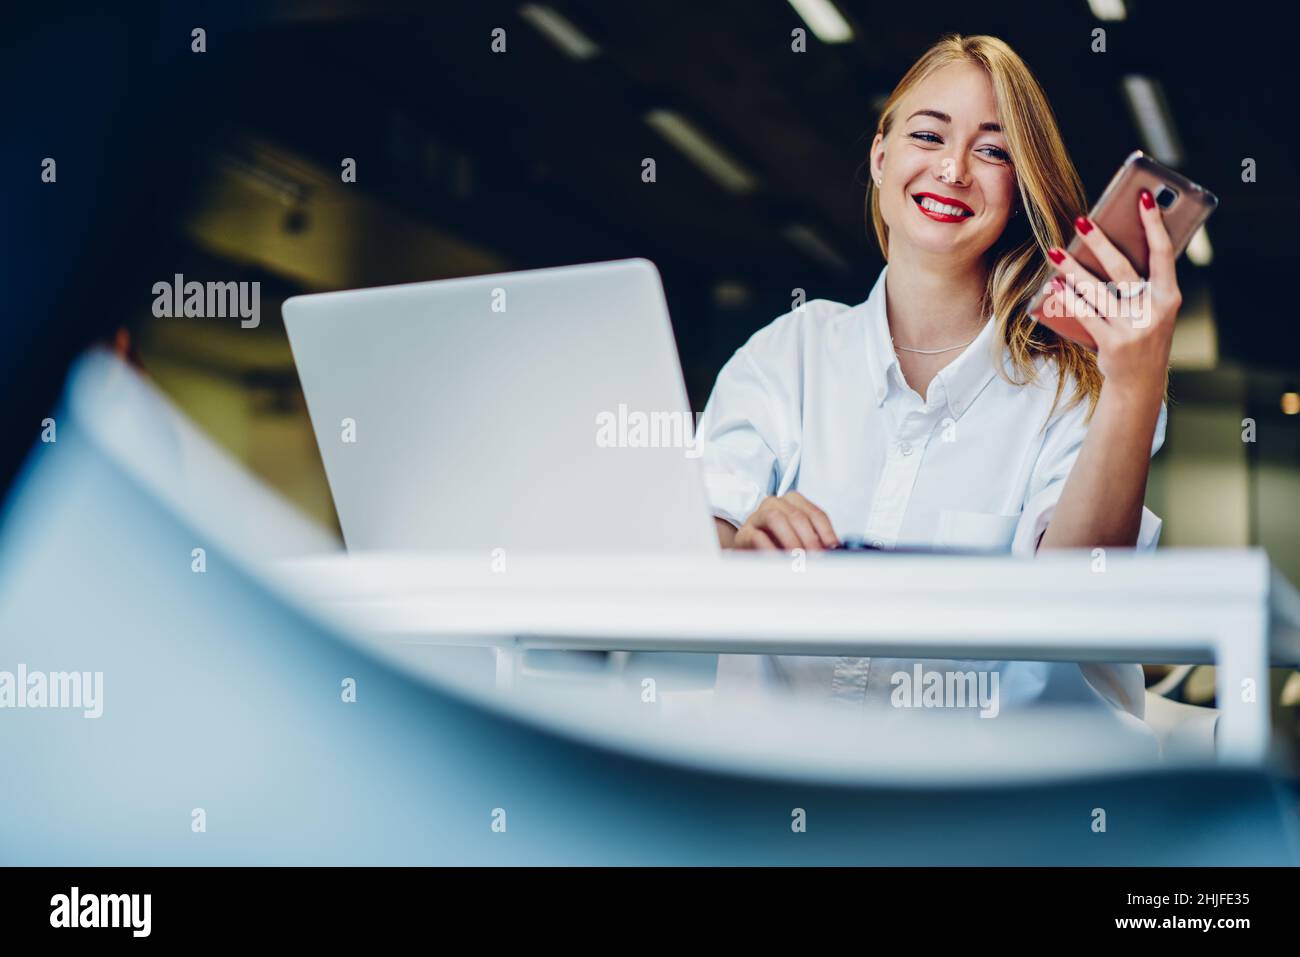 Smiling remote worker using phone and laptop Stock Photo